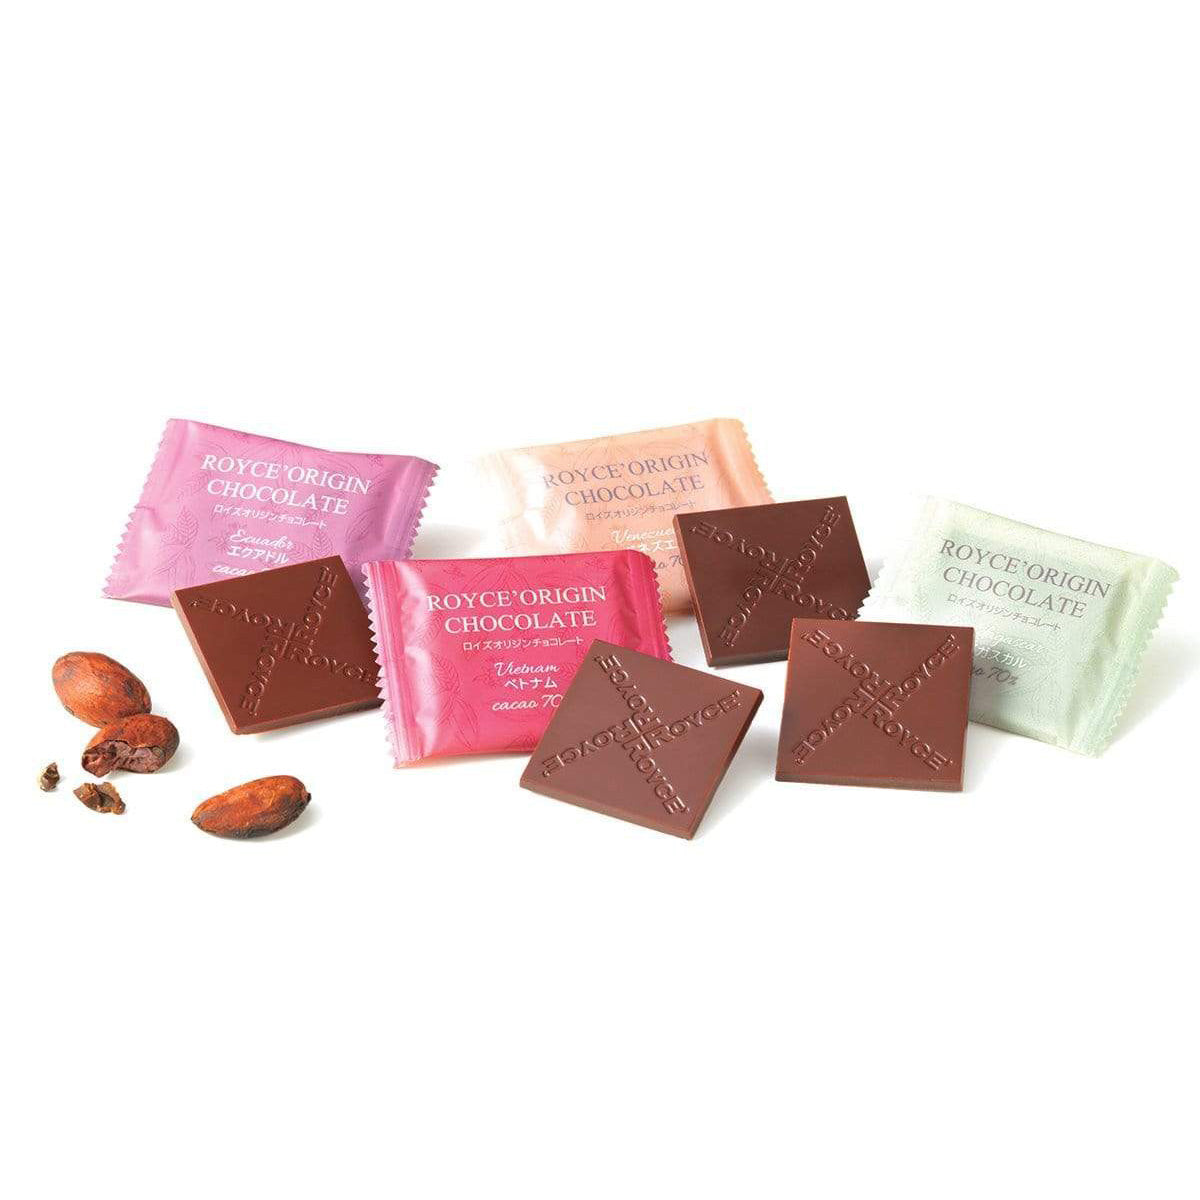 ROYCE' Chocolate - ROYCE' Origin Chocolate "Cacao 70%" - Image shows brown chocolate squares with the words "ROYCE'" engraved. From left: Pink wrapper with text of ROYCE' Origin Chocolate Ecuador Cacao 70 %, Pink wrapper with text of ROYCE' Origin Chocolate Vietnam Cacao 70%, Orange wrapper with text of ROYCE' Origin Chocolate Venezuela Cacao 70%, and Green wrapper with text of ROYCE' Origin Chocolate Madagascar Cacao 70 %. Accents include loose cacao beans.